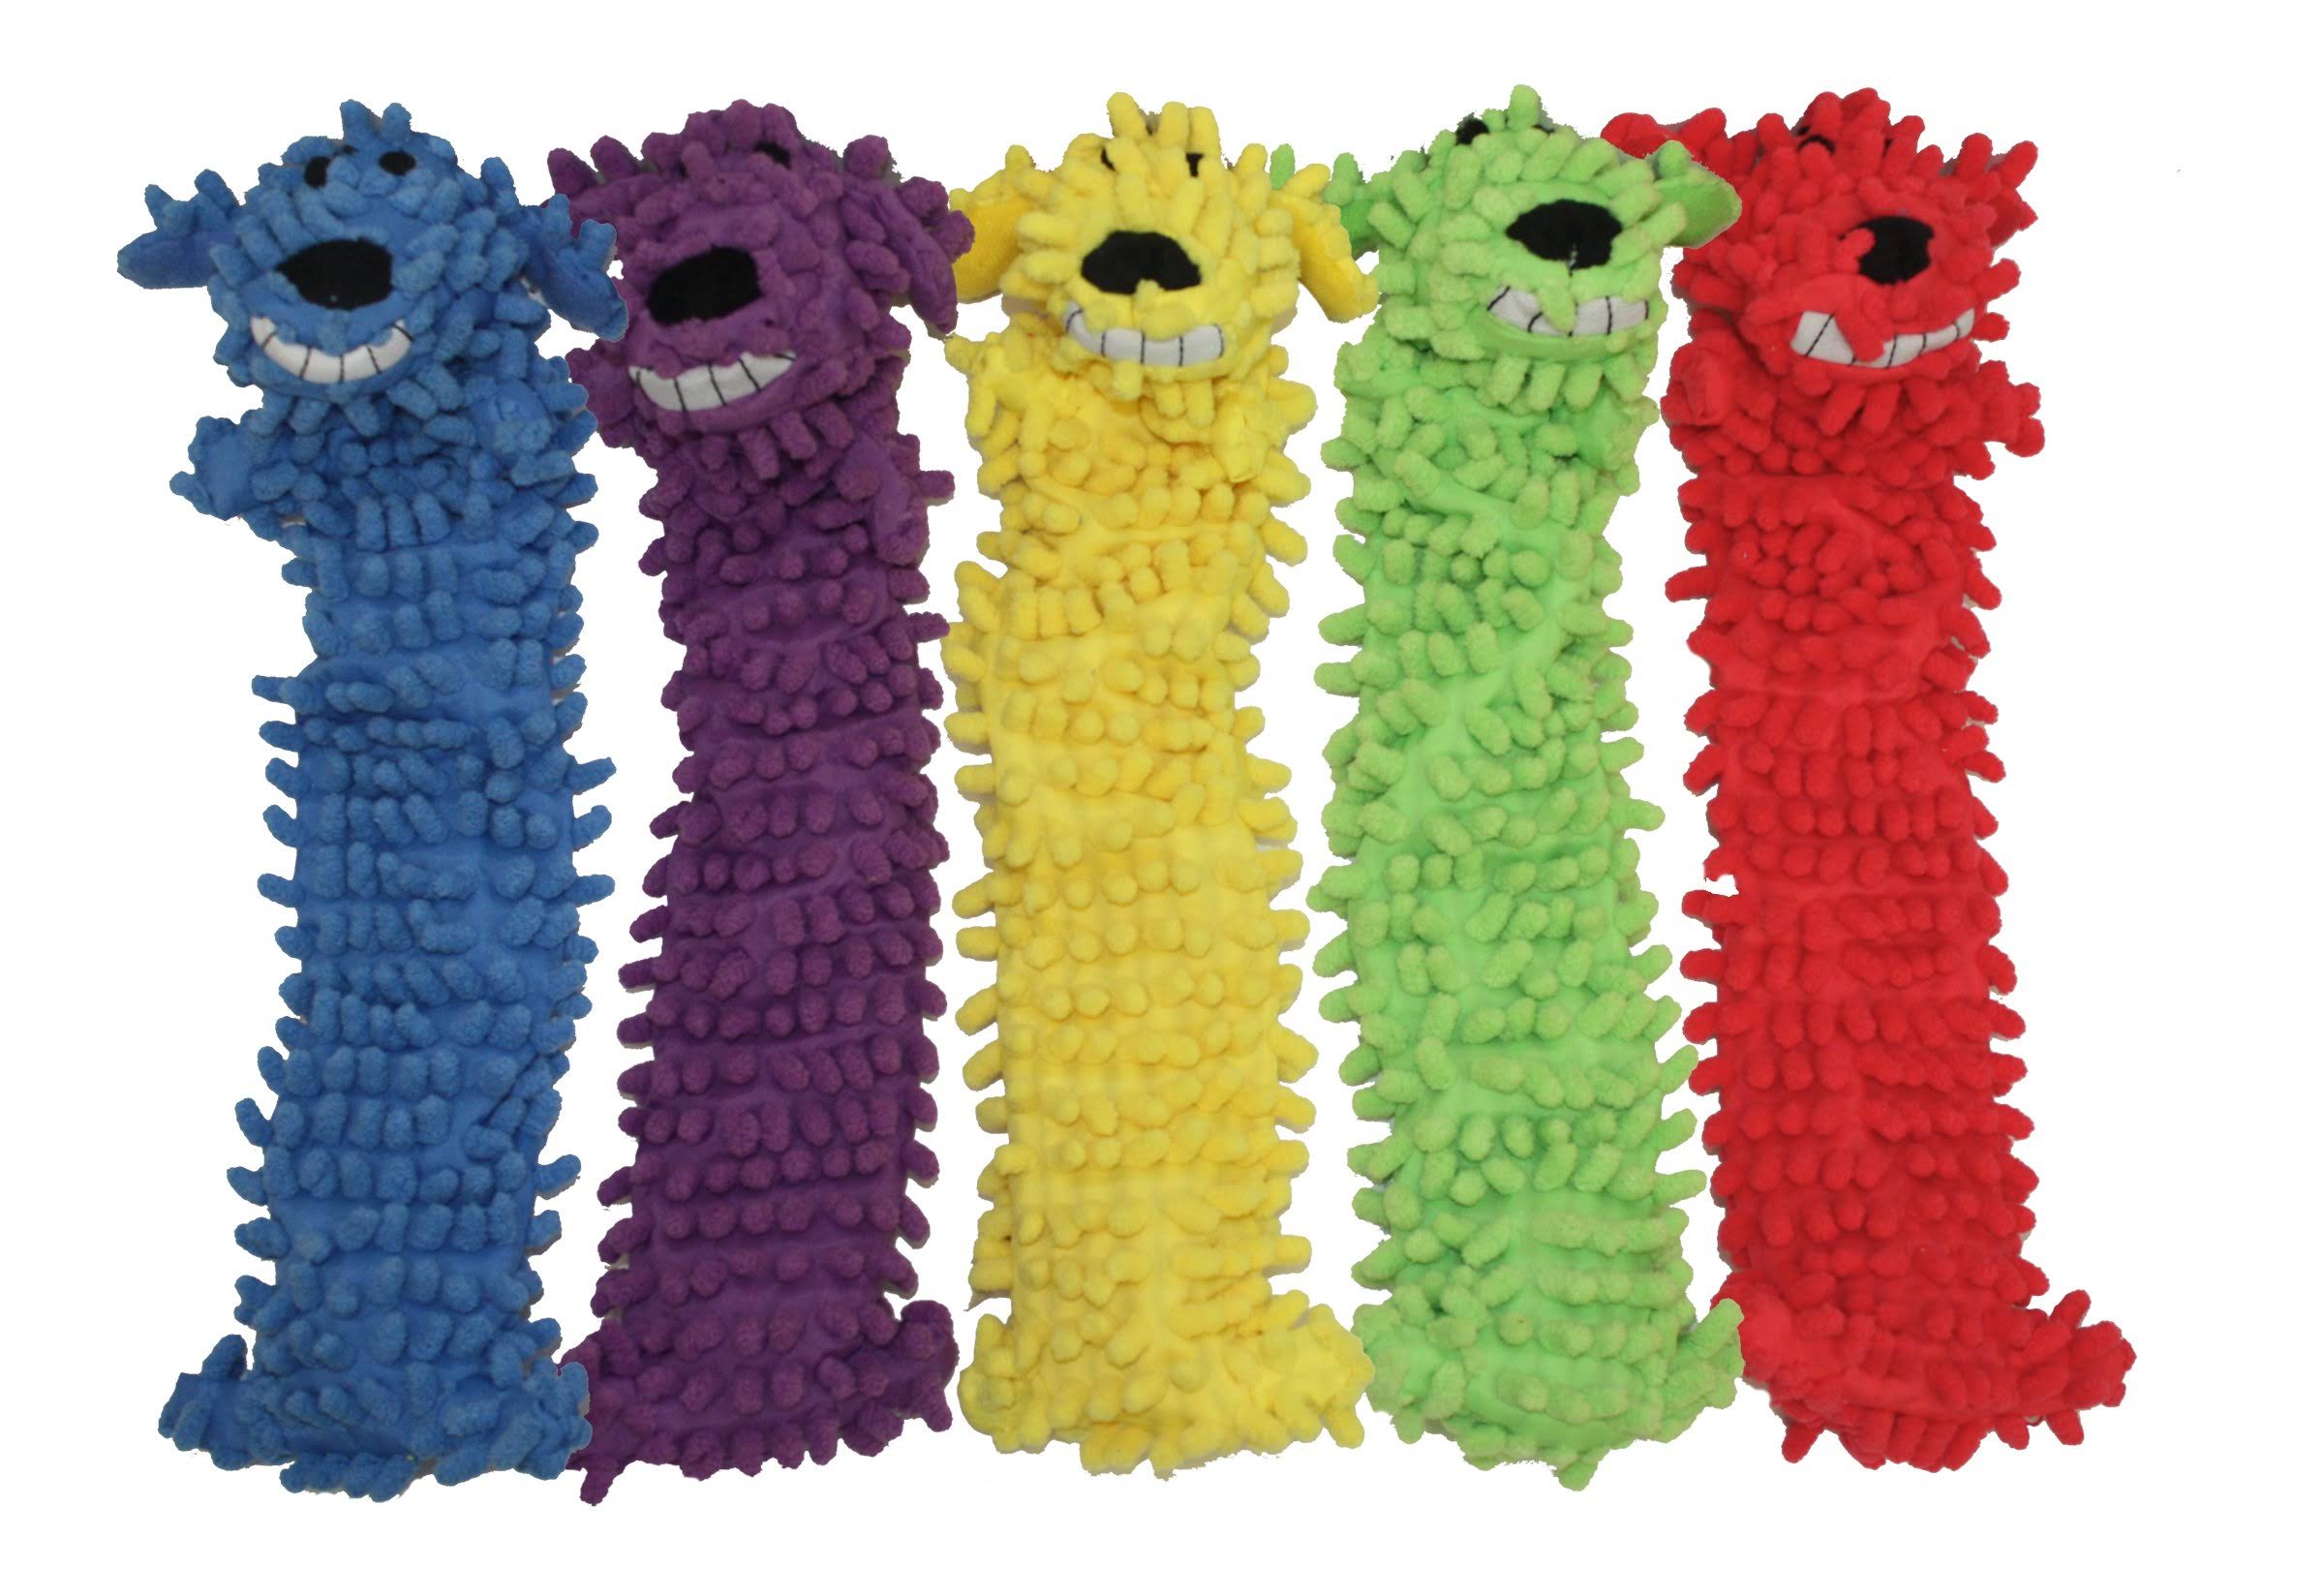 Multipet's Floppy Loofa Dog Toy - Assorted Colors, 12"